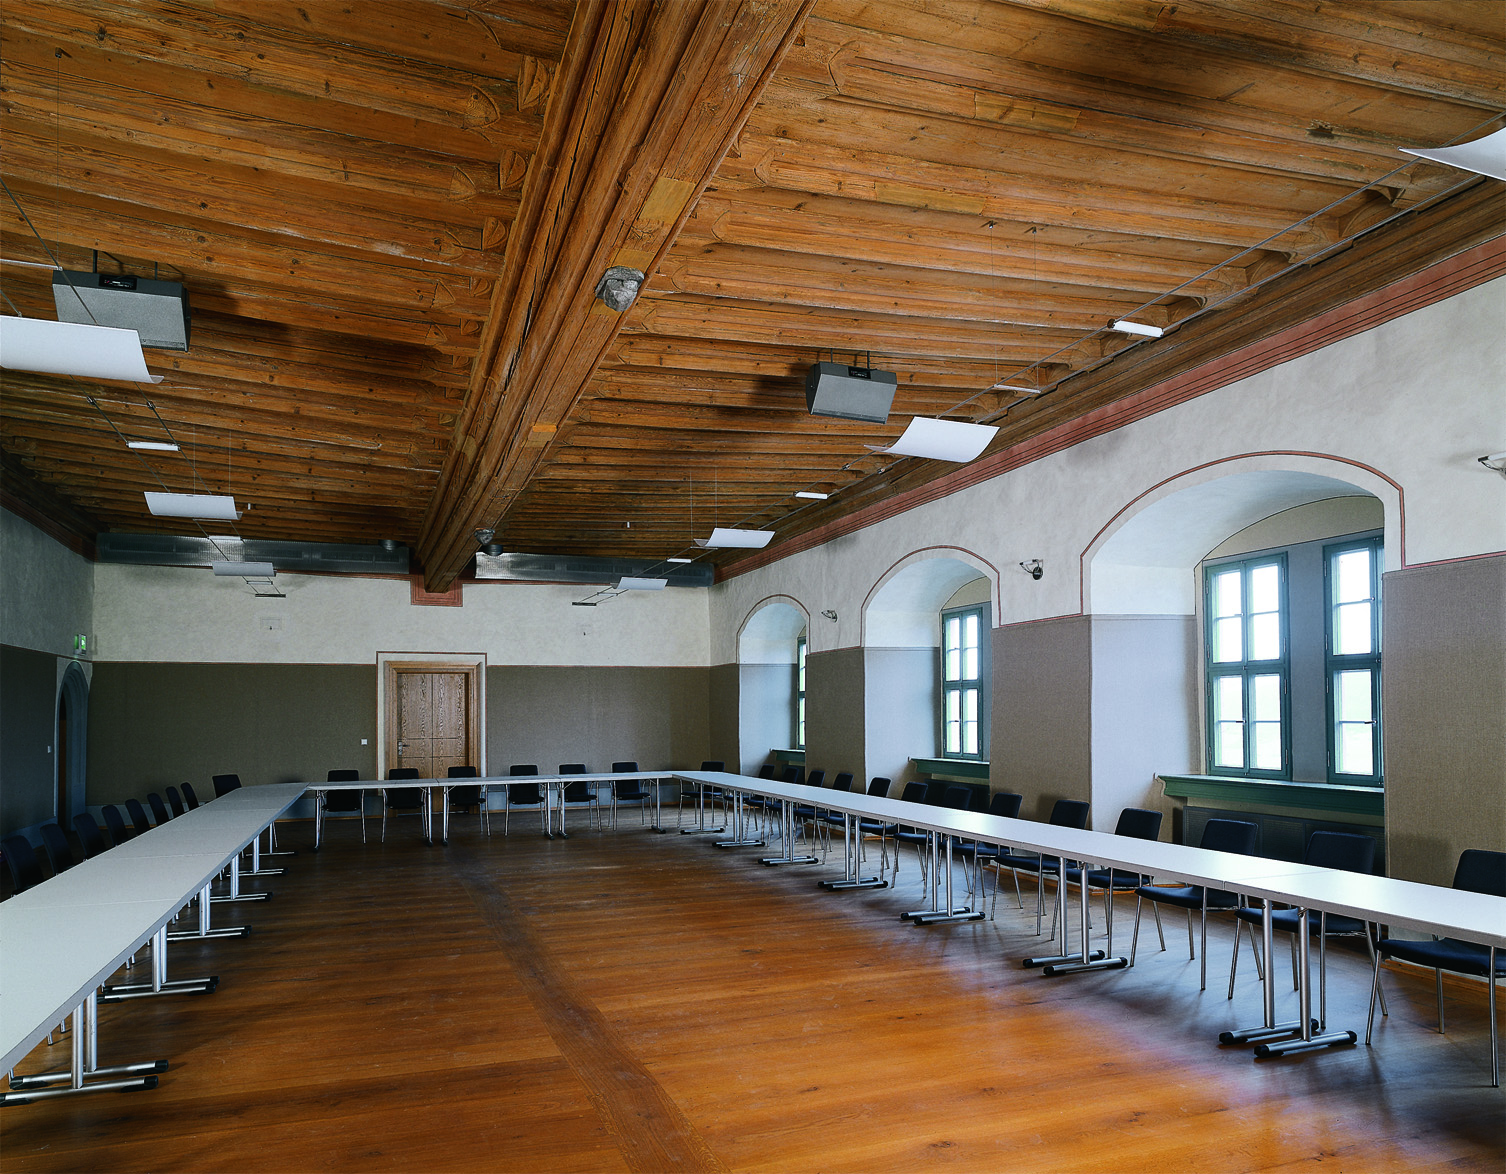 View of a conference room